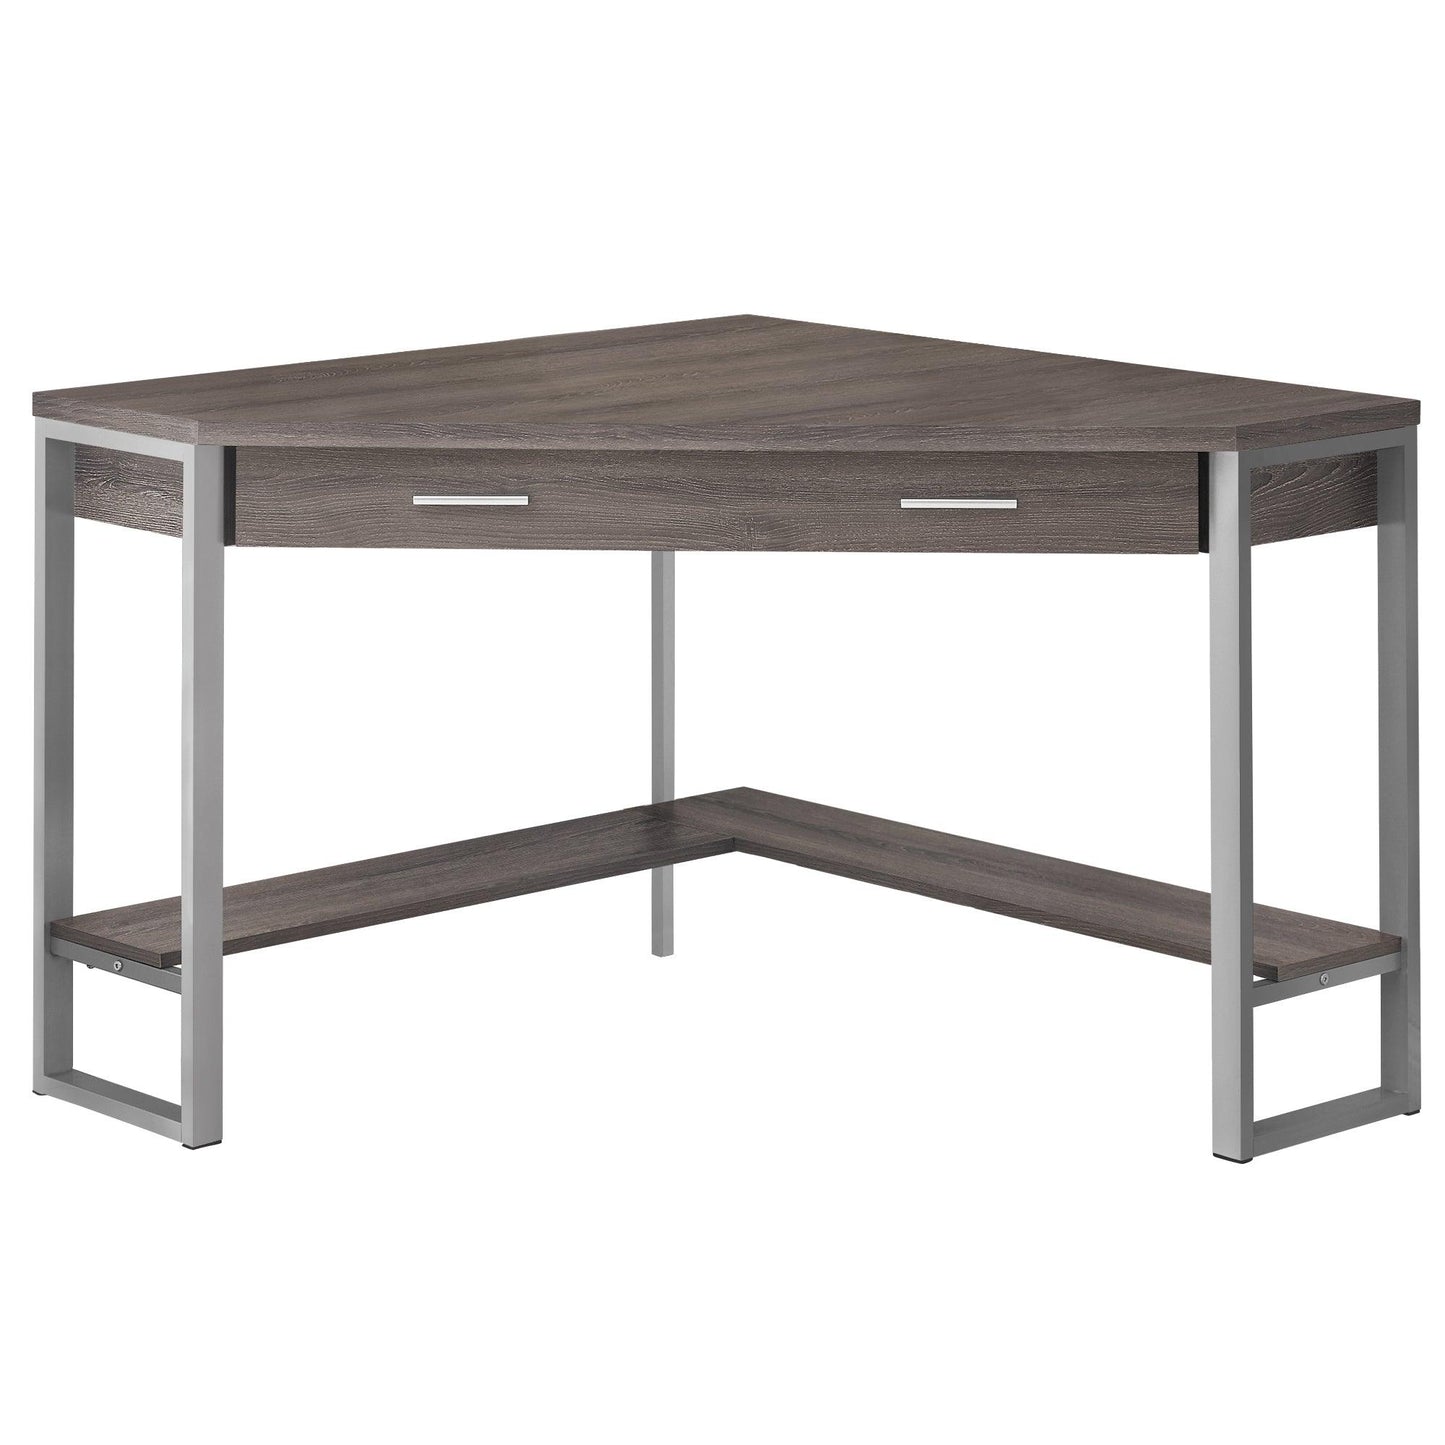 42" x 42" x 30" Dark Taupe Silver Particle Board Hollow Core Metal Computer Desk - AFS